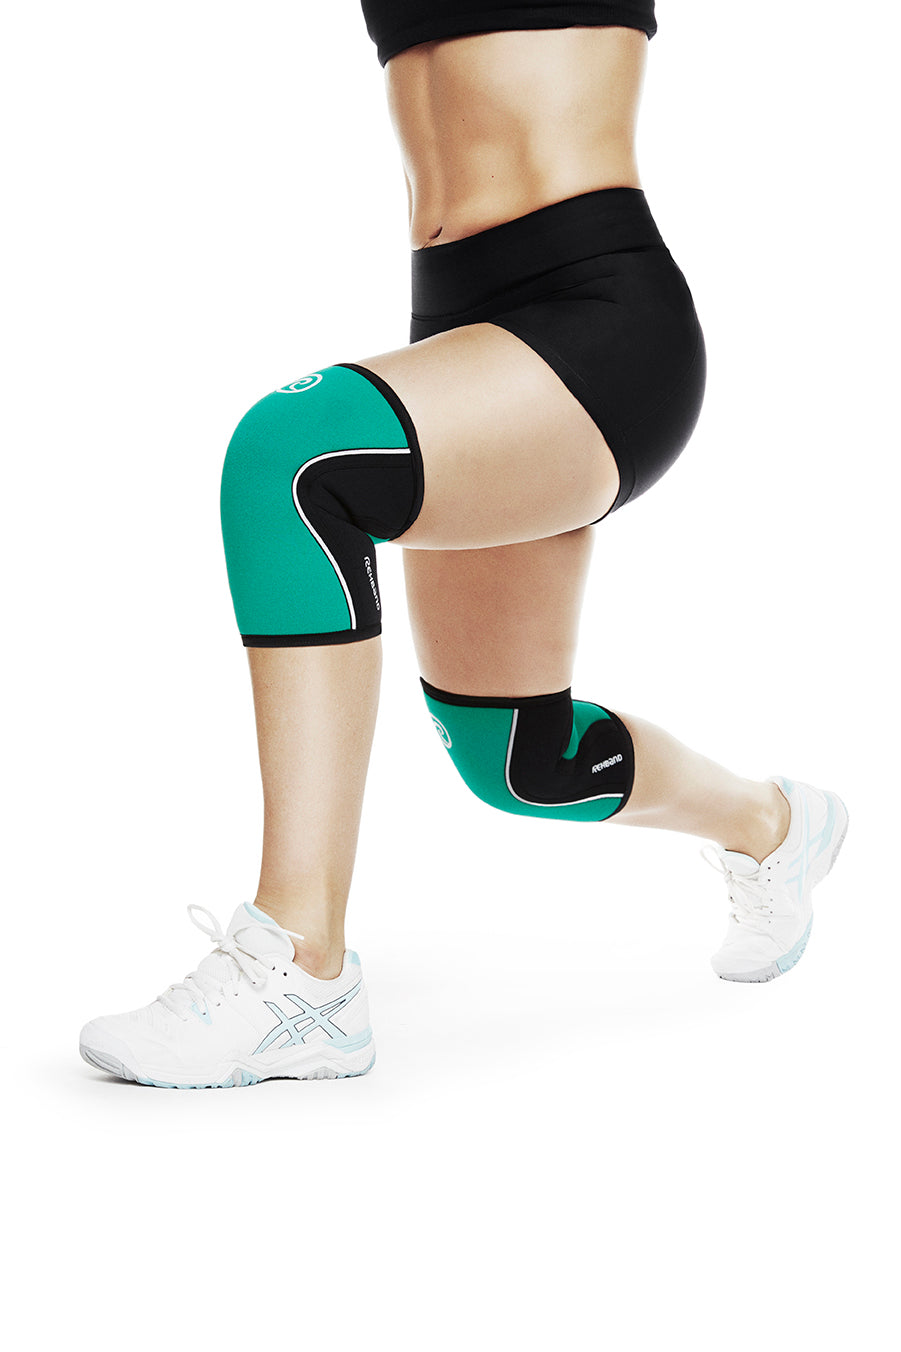 Rx Knee Sleeves 5mm - Emerald Green/Black from Rehband for Genejack WOD